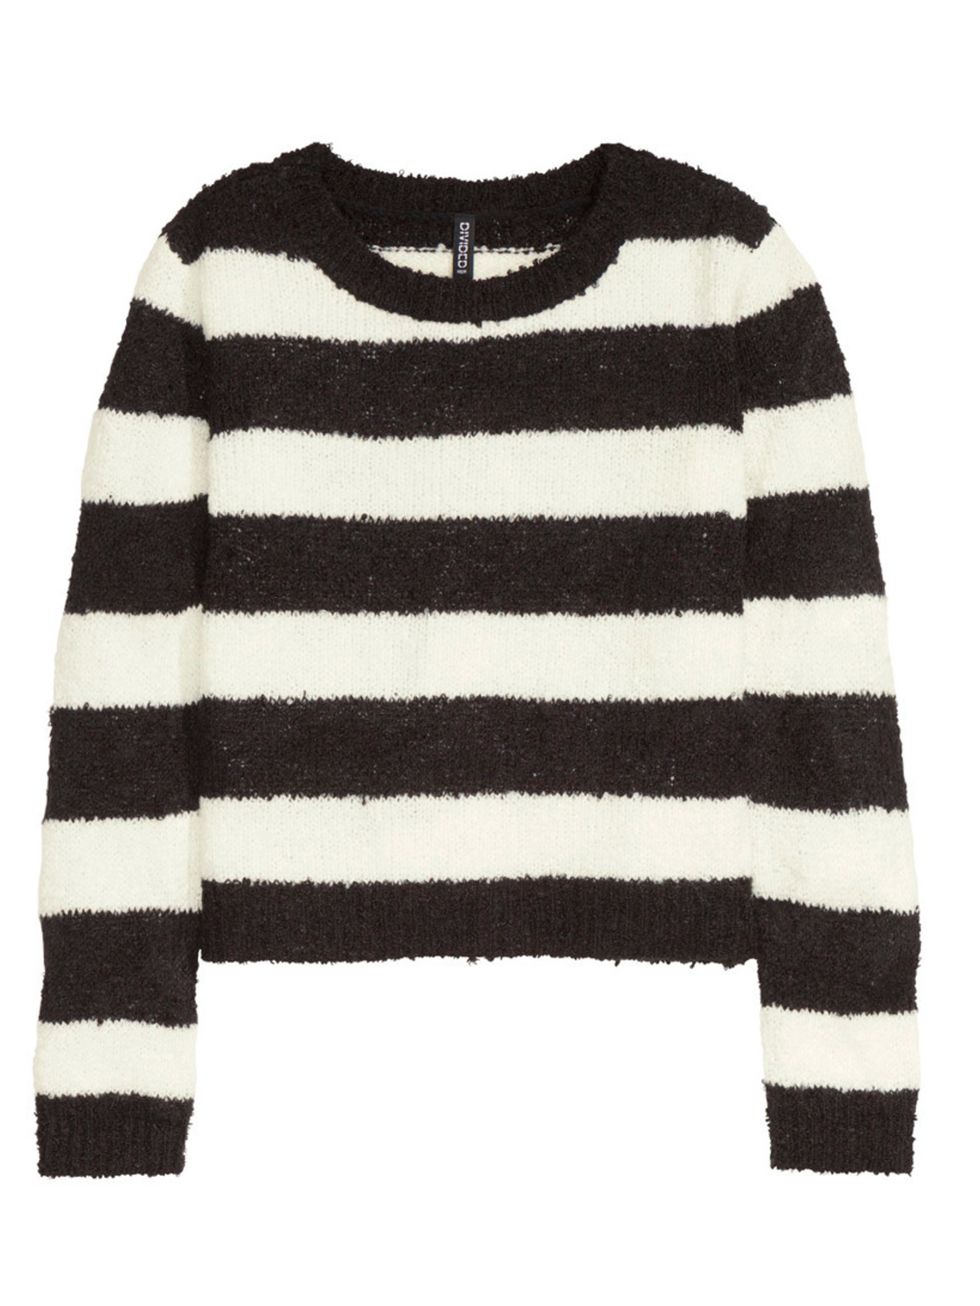 <p><a href="http://www.hm.com/gb/product/46990?article=46990-A" target="_blank">H&M</a> jumper, £12.99</p>